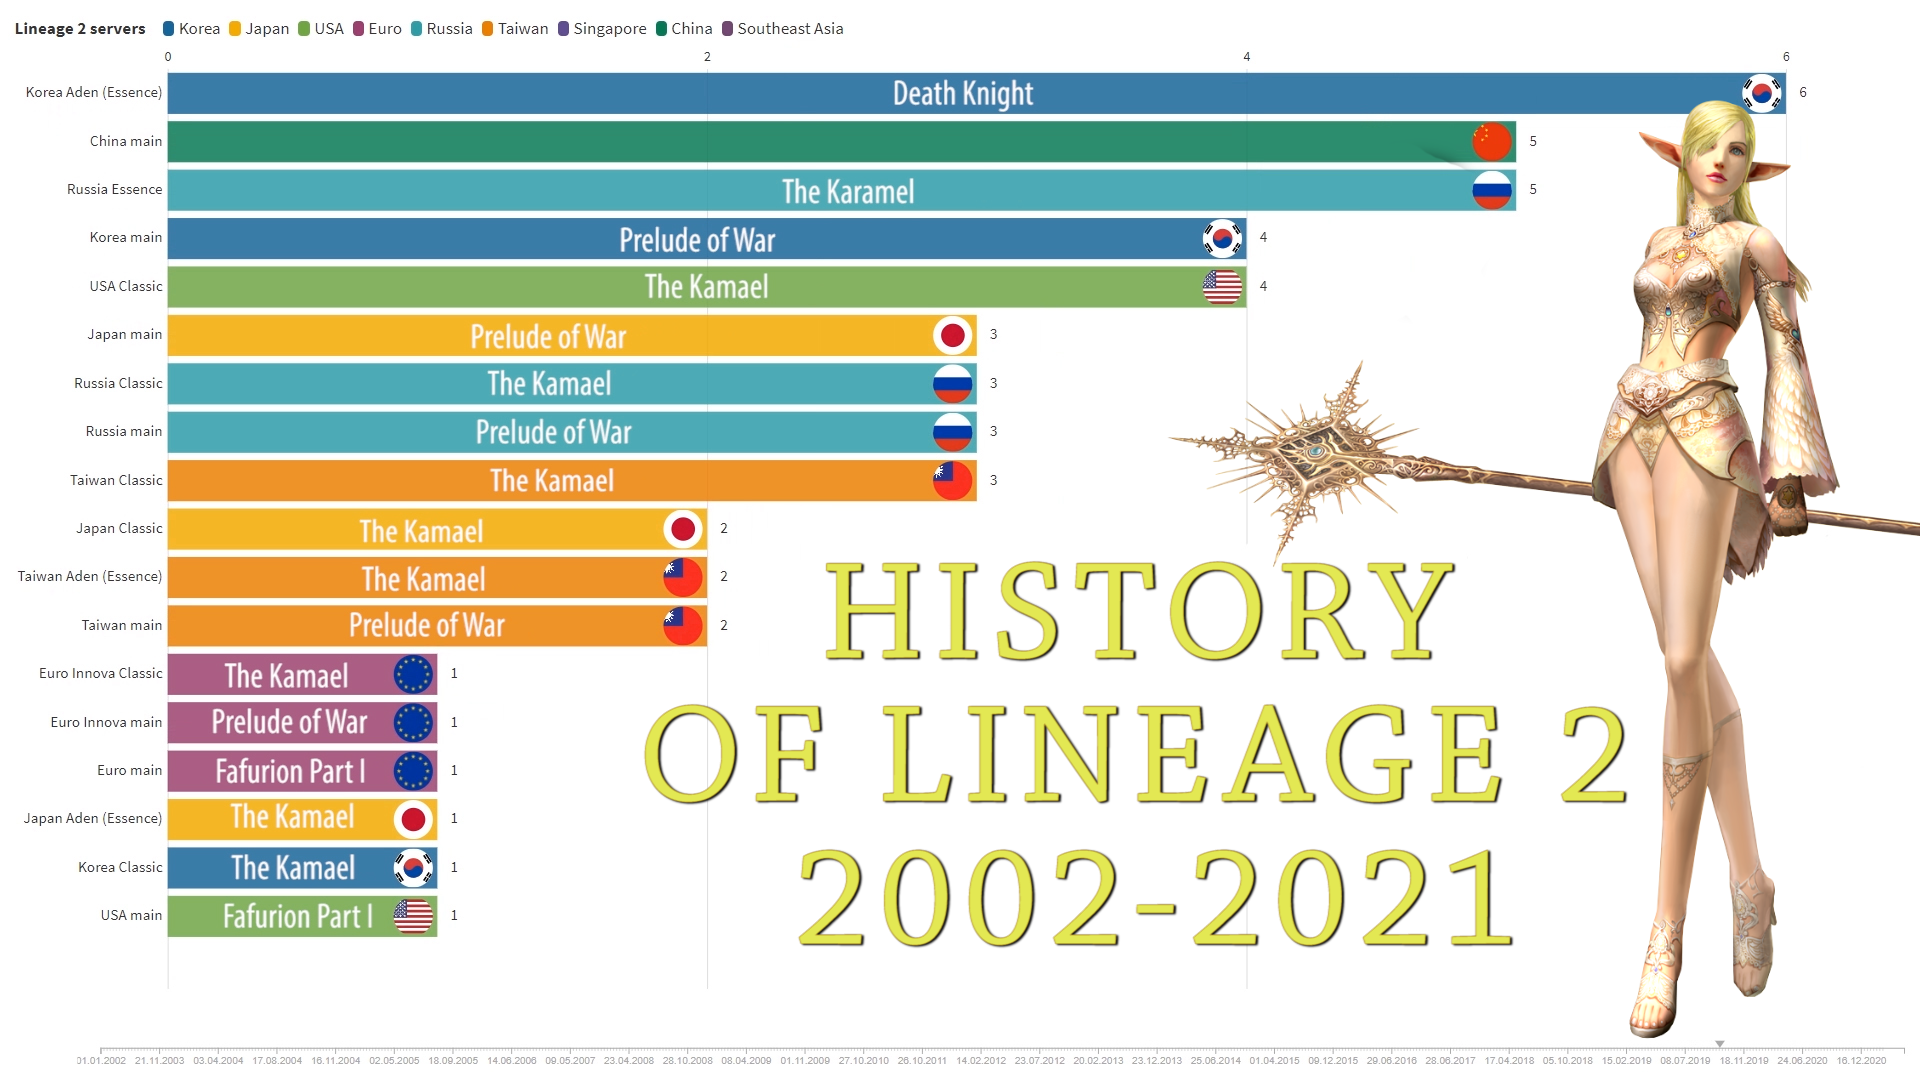 History of Lineage 2 in the World. 2002-2021